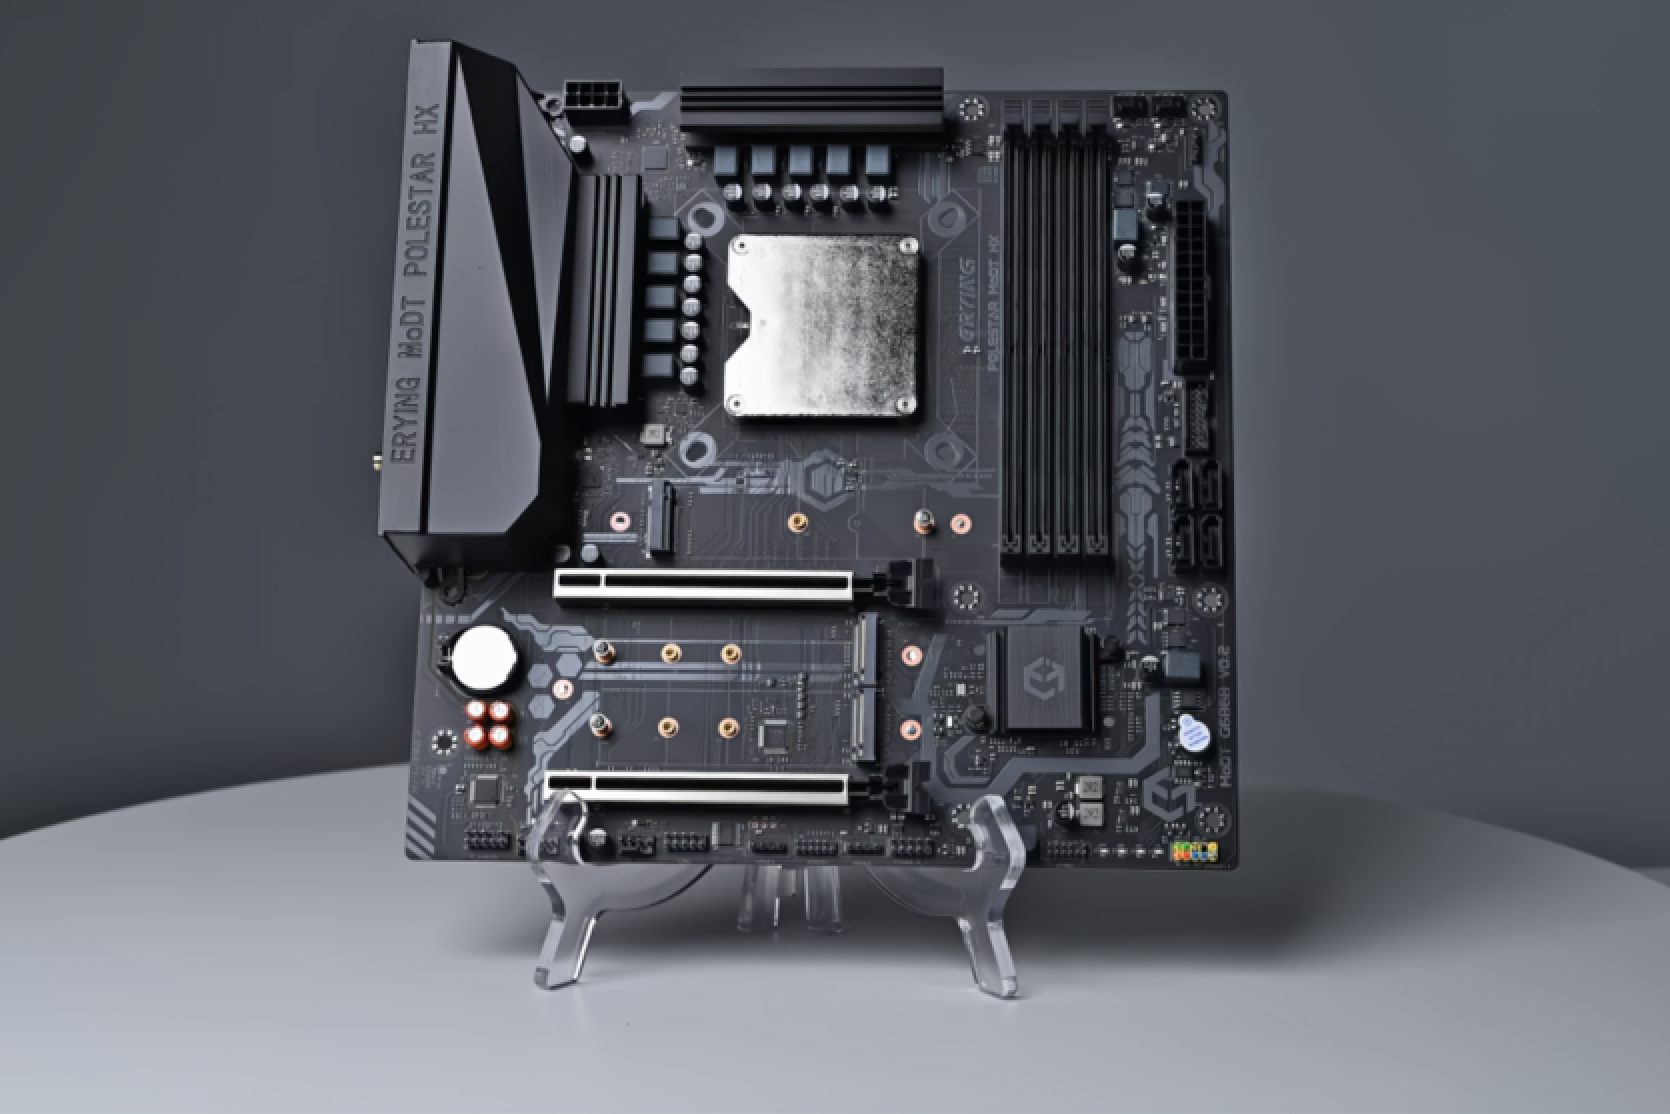 Intel mobile processors to desktops: Erying unveils motherboards for the 13th generation Core HX